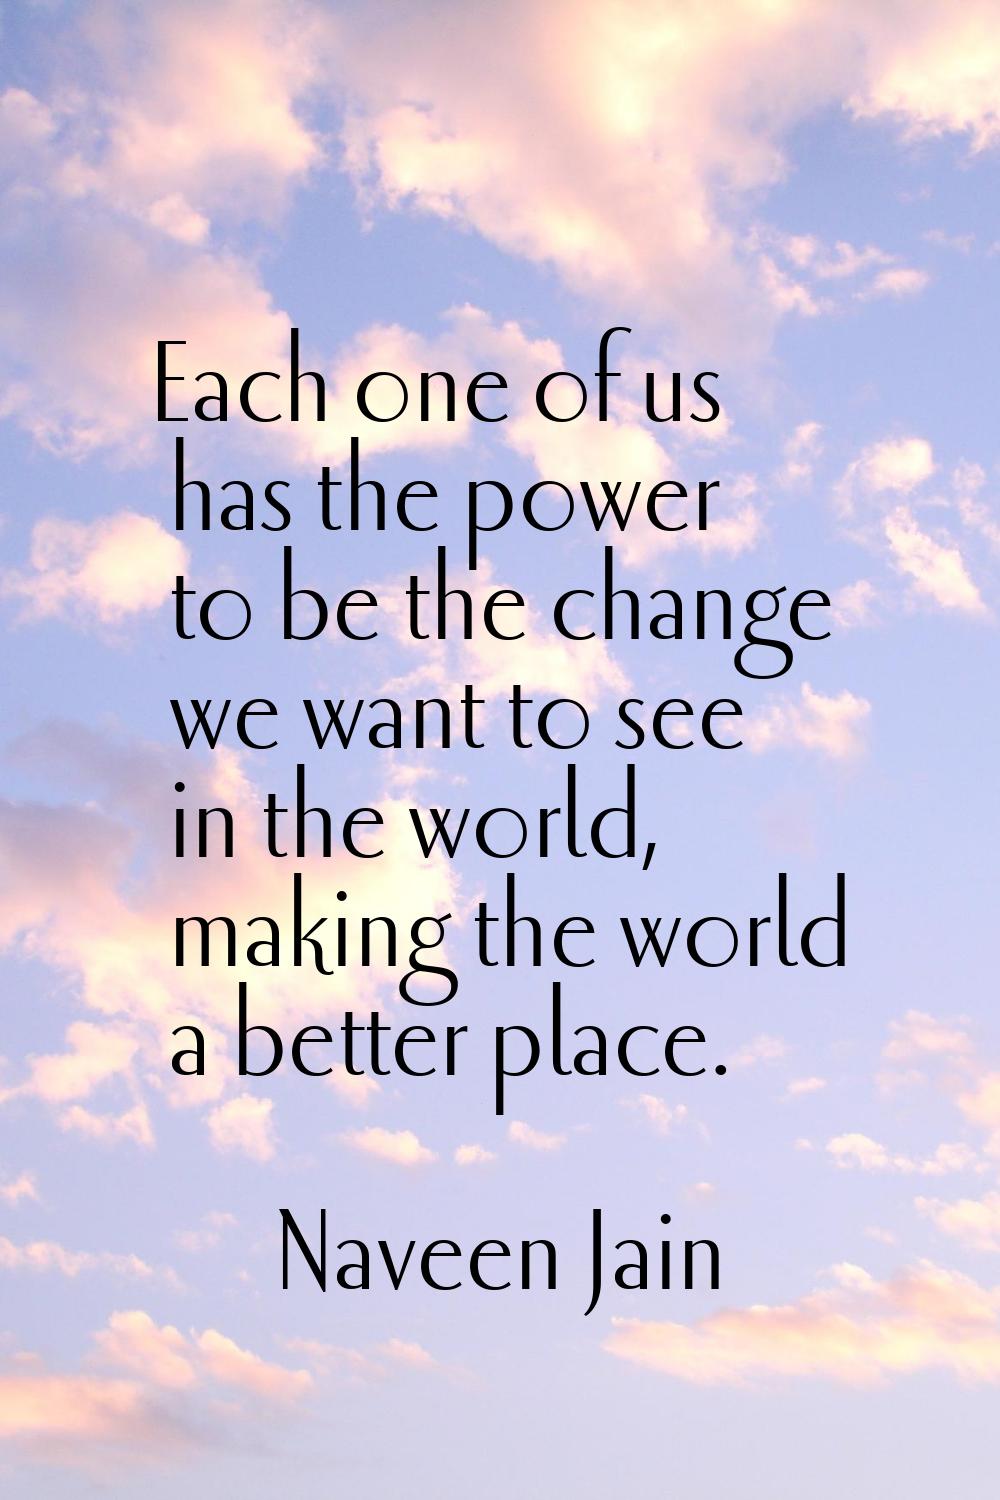 Each one of us has the power to be the change we want to see in the world, making the world a bette